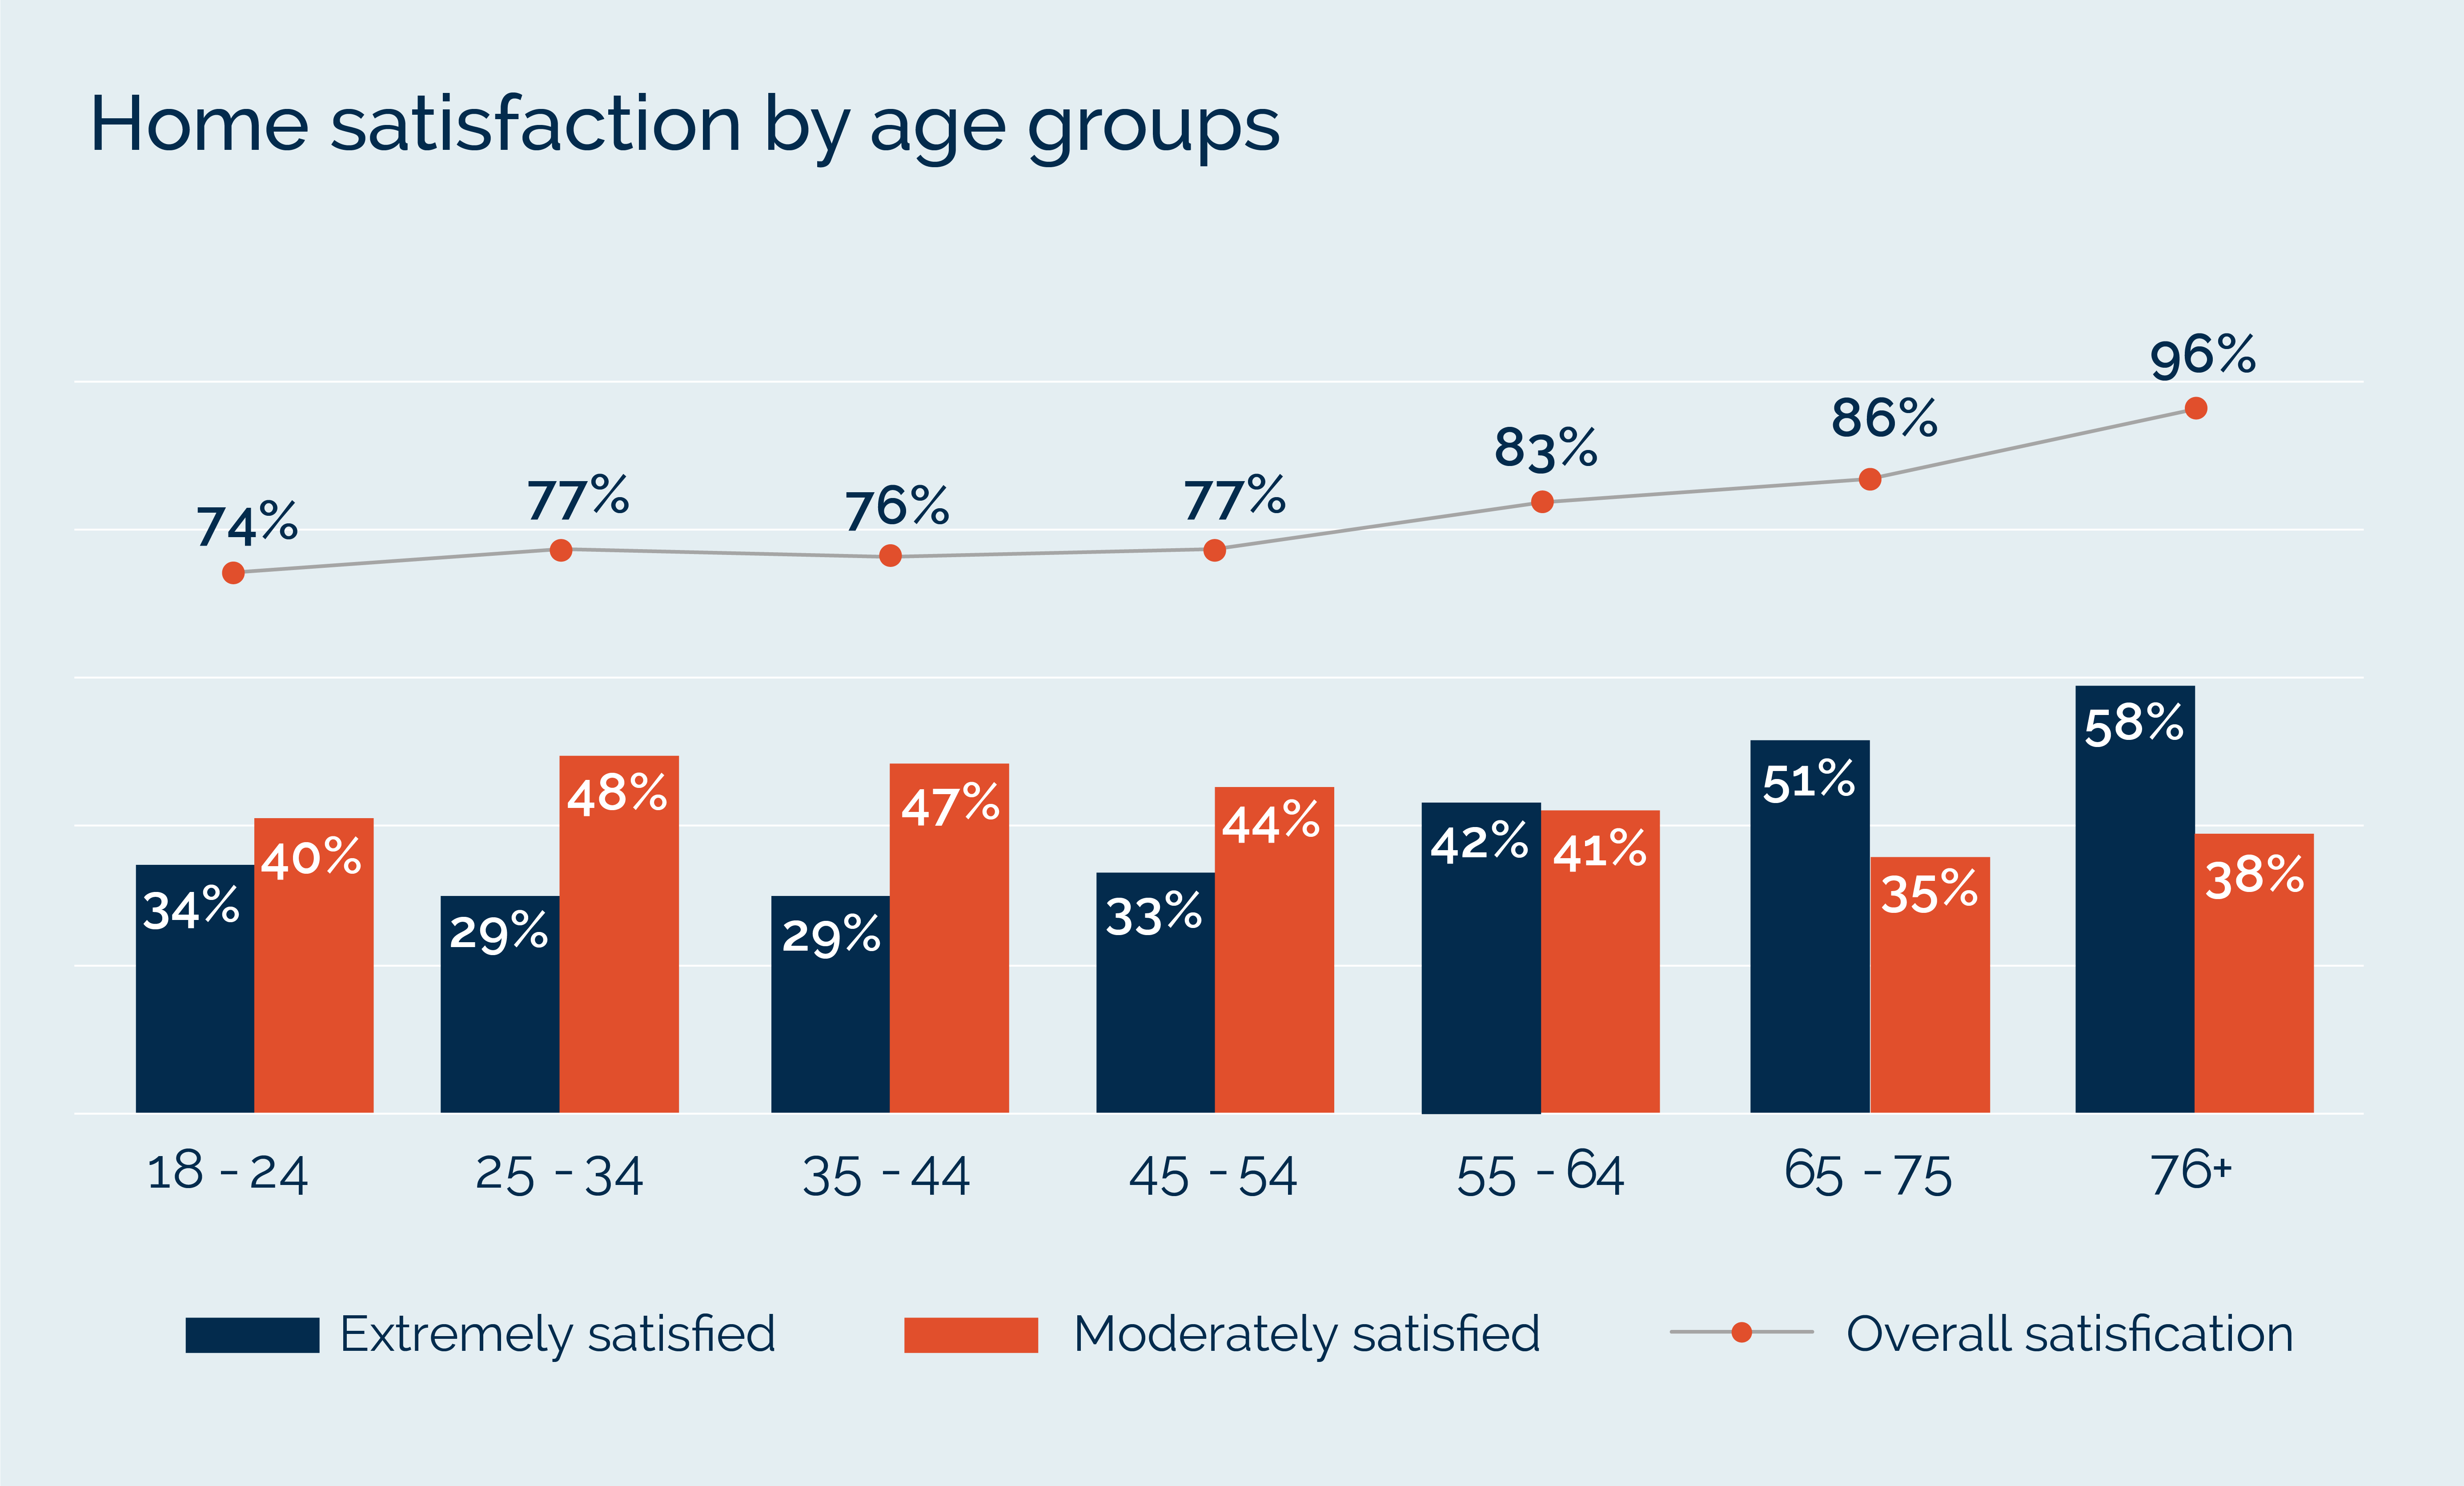 Home satisfaction by age groups